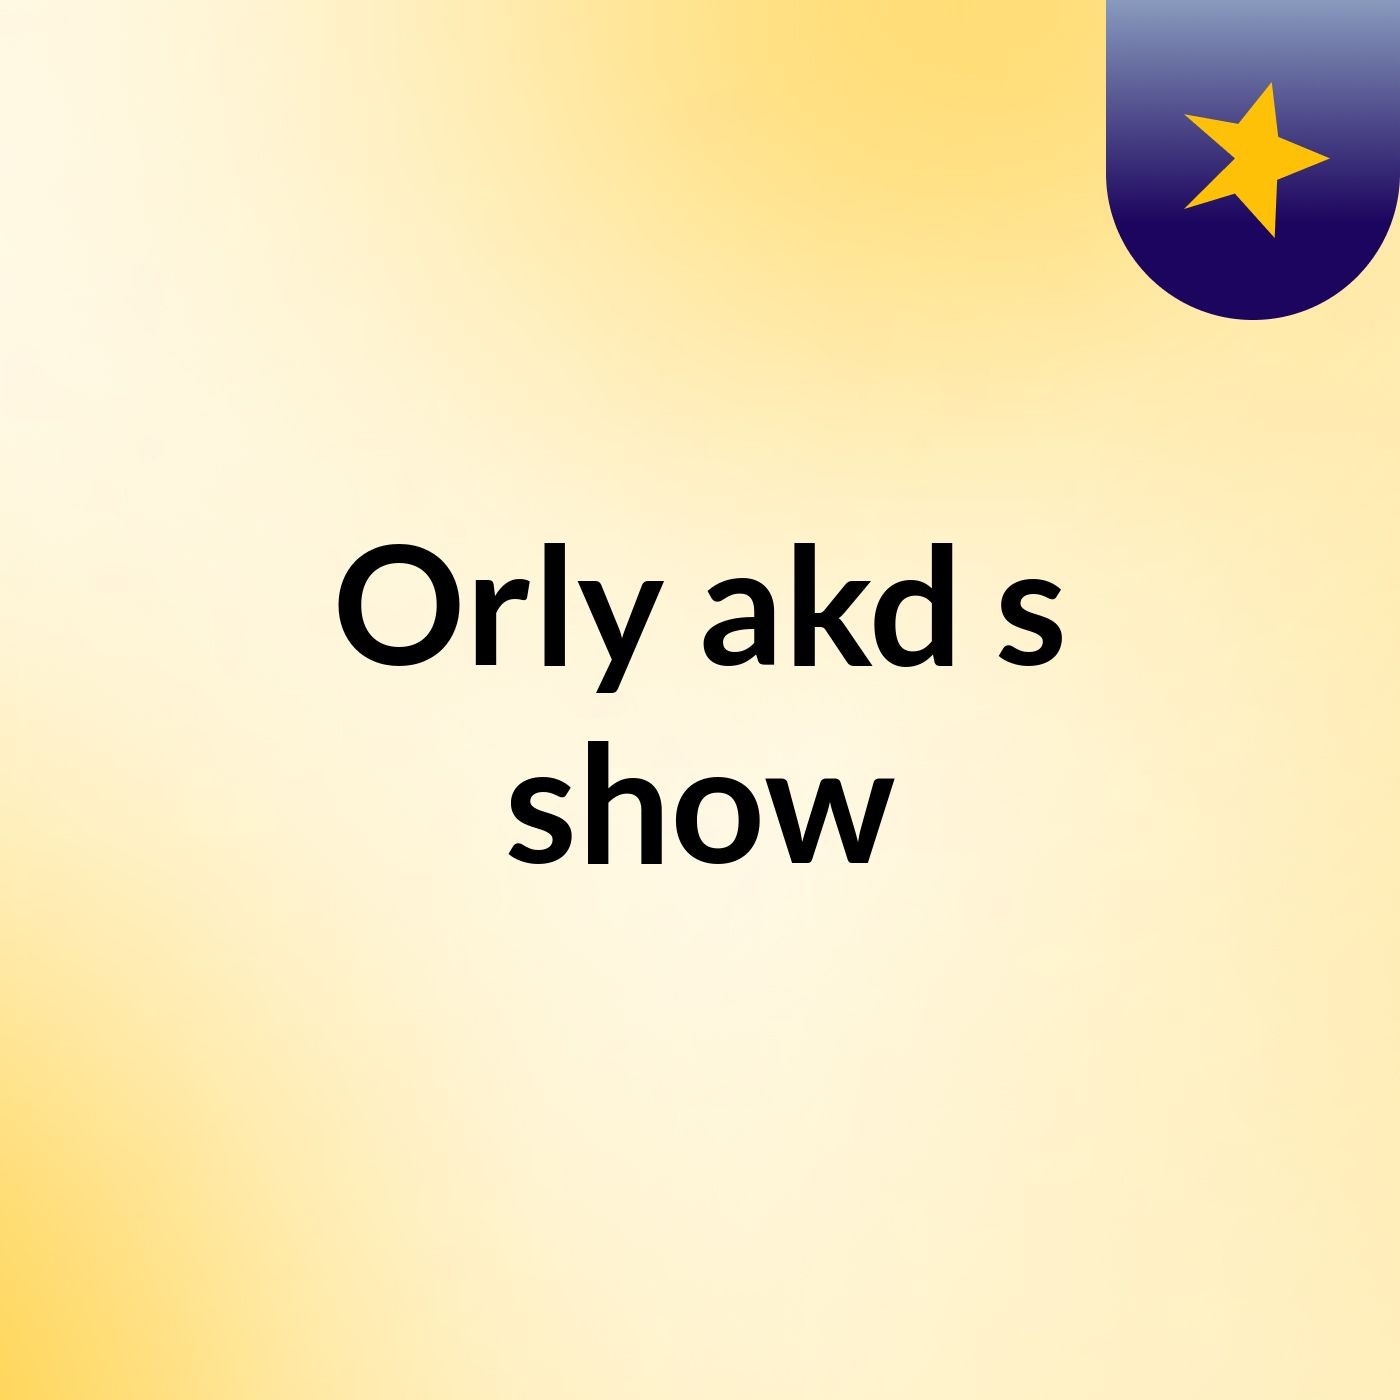 Orly akd's show